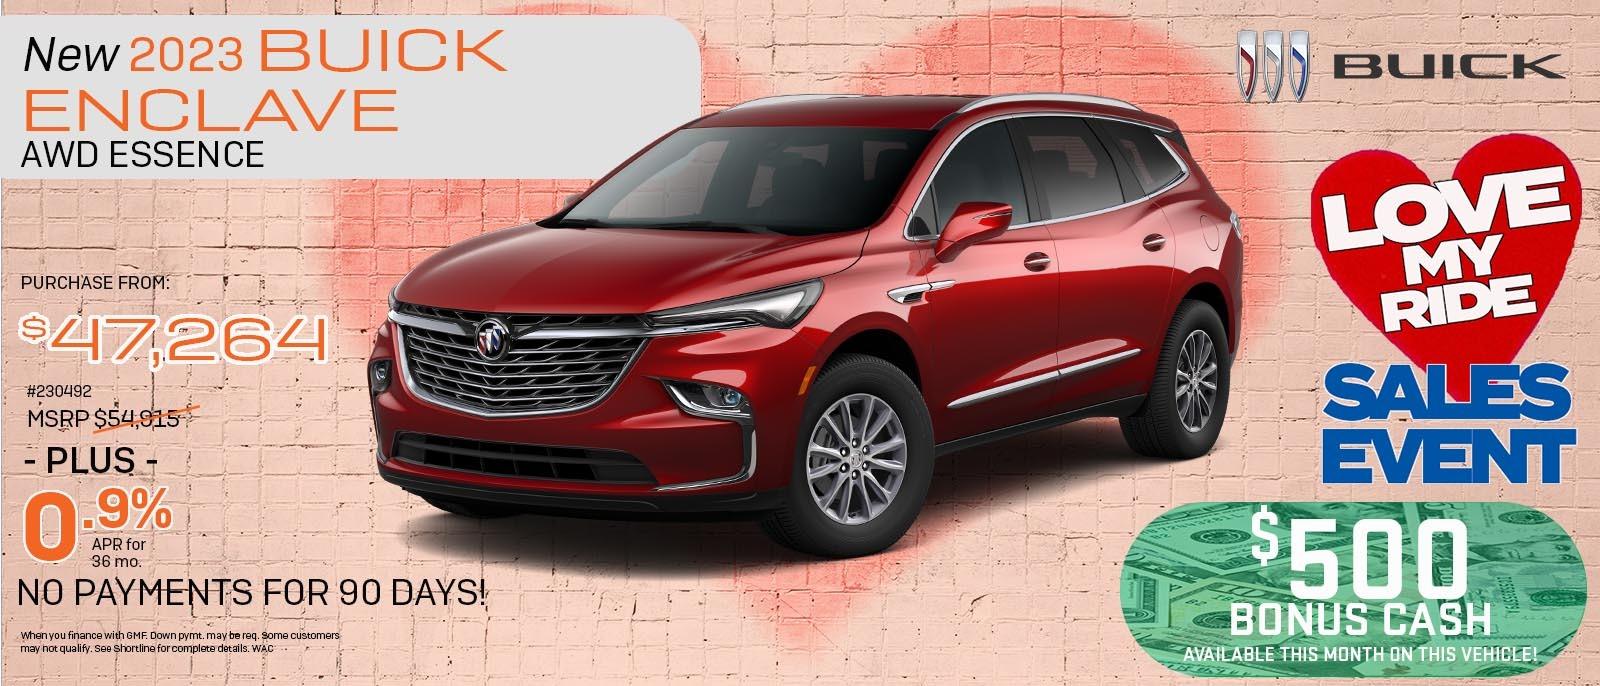 View the Buick Enclave Special in Denver at Shorltine